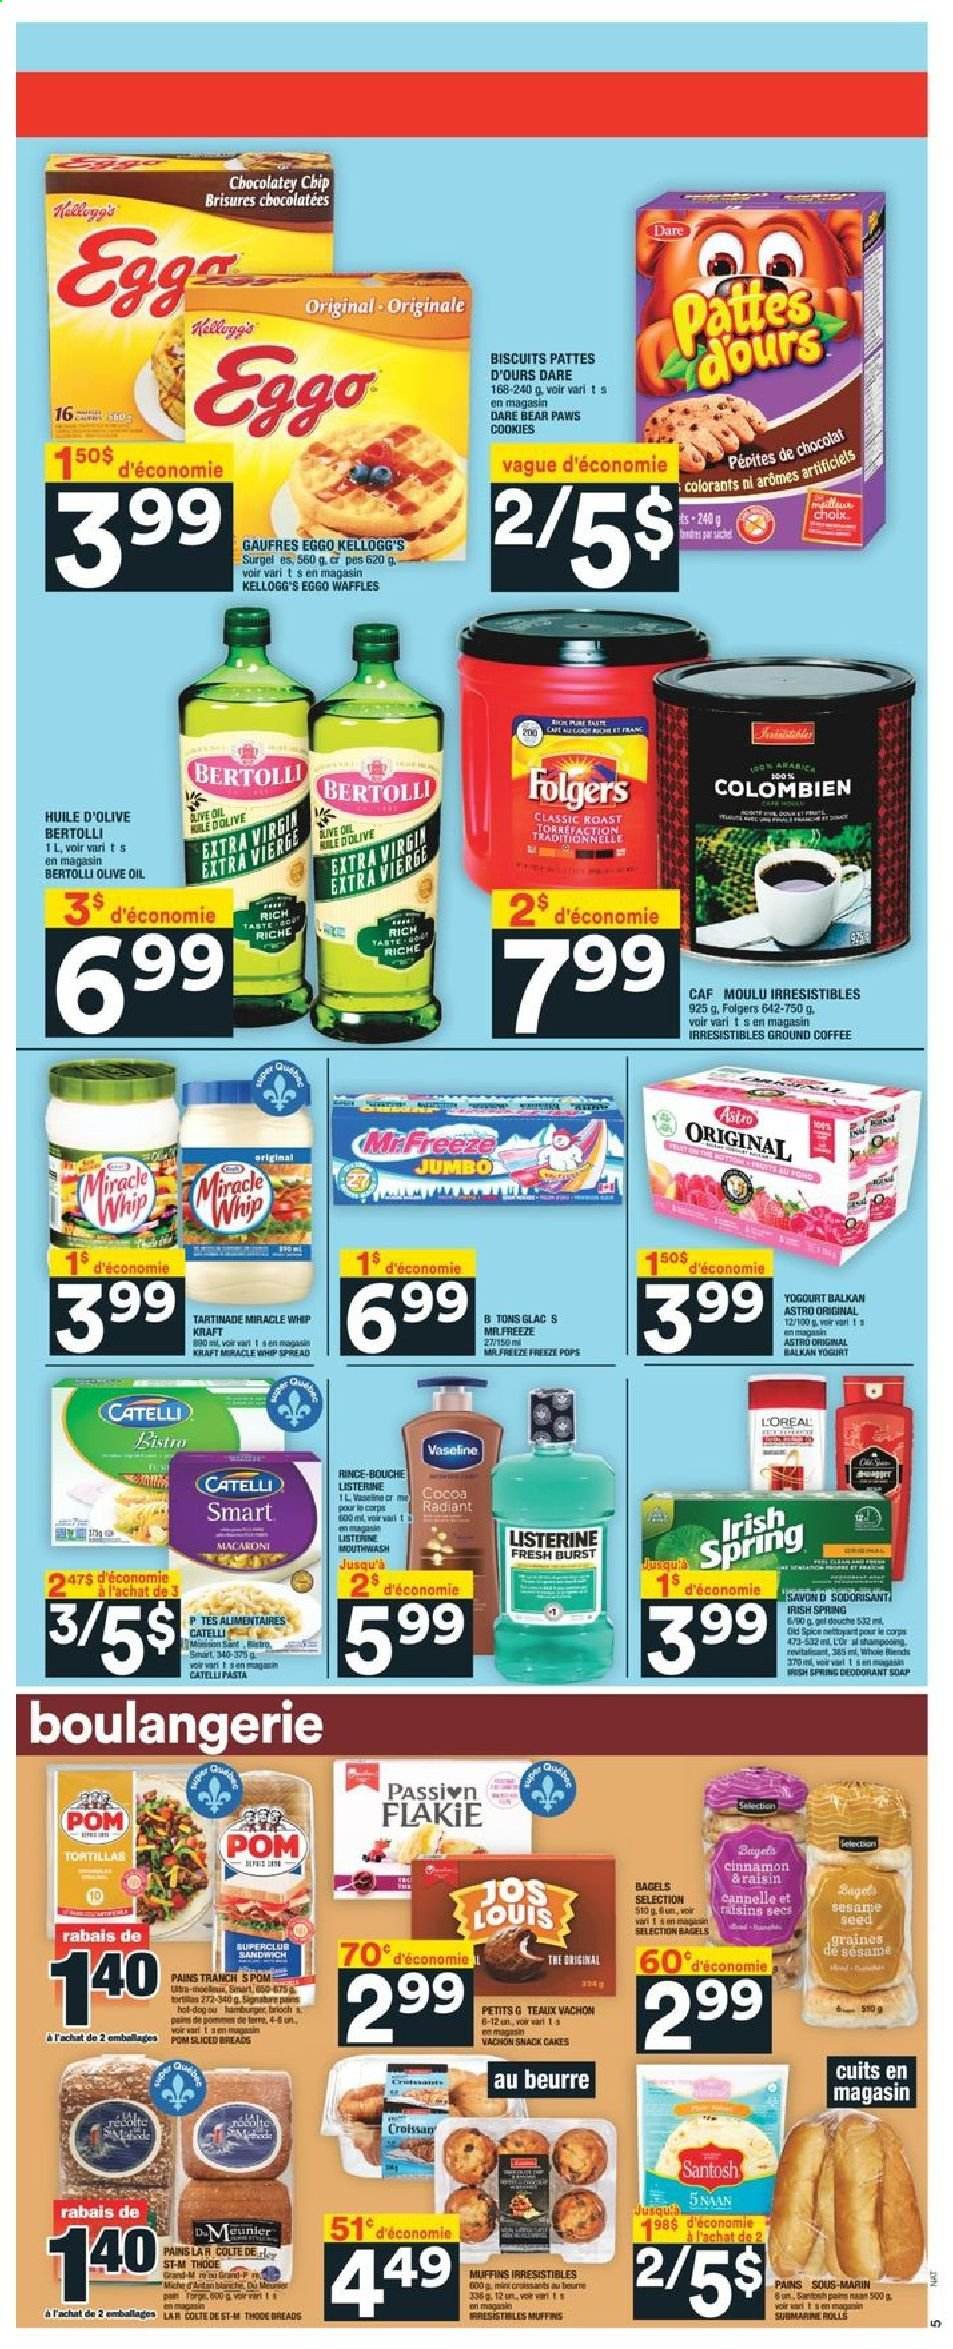 thumbnail - Super C Flyer - June 10, 2021 - June 16, 2021 - Sales products - bagels, tortillas, cake, muffin, waffles, sandwich, macaroni, hamburger, Kraft®, Bertolli, yoghurt, Miracle Whip, cookies, snack, Kellogg's, biscuit, sesame seed, spice, cinnamon, oil, dried fruit, coffee, Folgers, ground coffee, L'Or, Vaseline, soap, mouthwash, L’Oréal, anti-perspirant, Listerine, raisins, Old Spice, deodorant. Page 6.